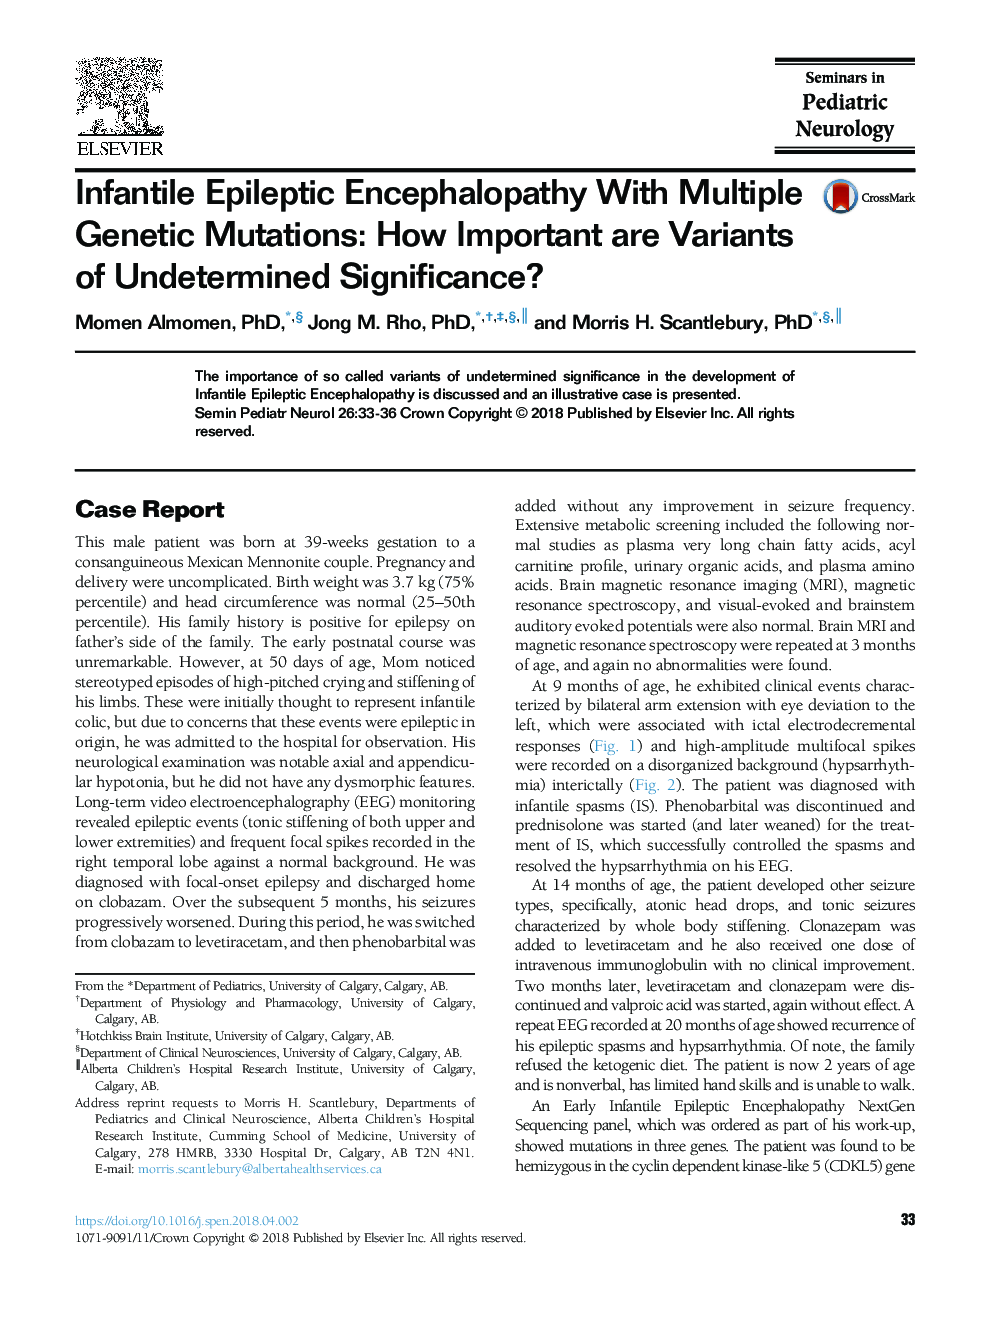 Infantile Epileptic Encephalopathy With Multiple Genetic Mutations: How Important are Variants of Undetermined Significance?